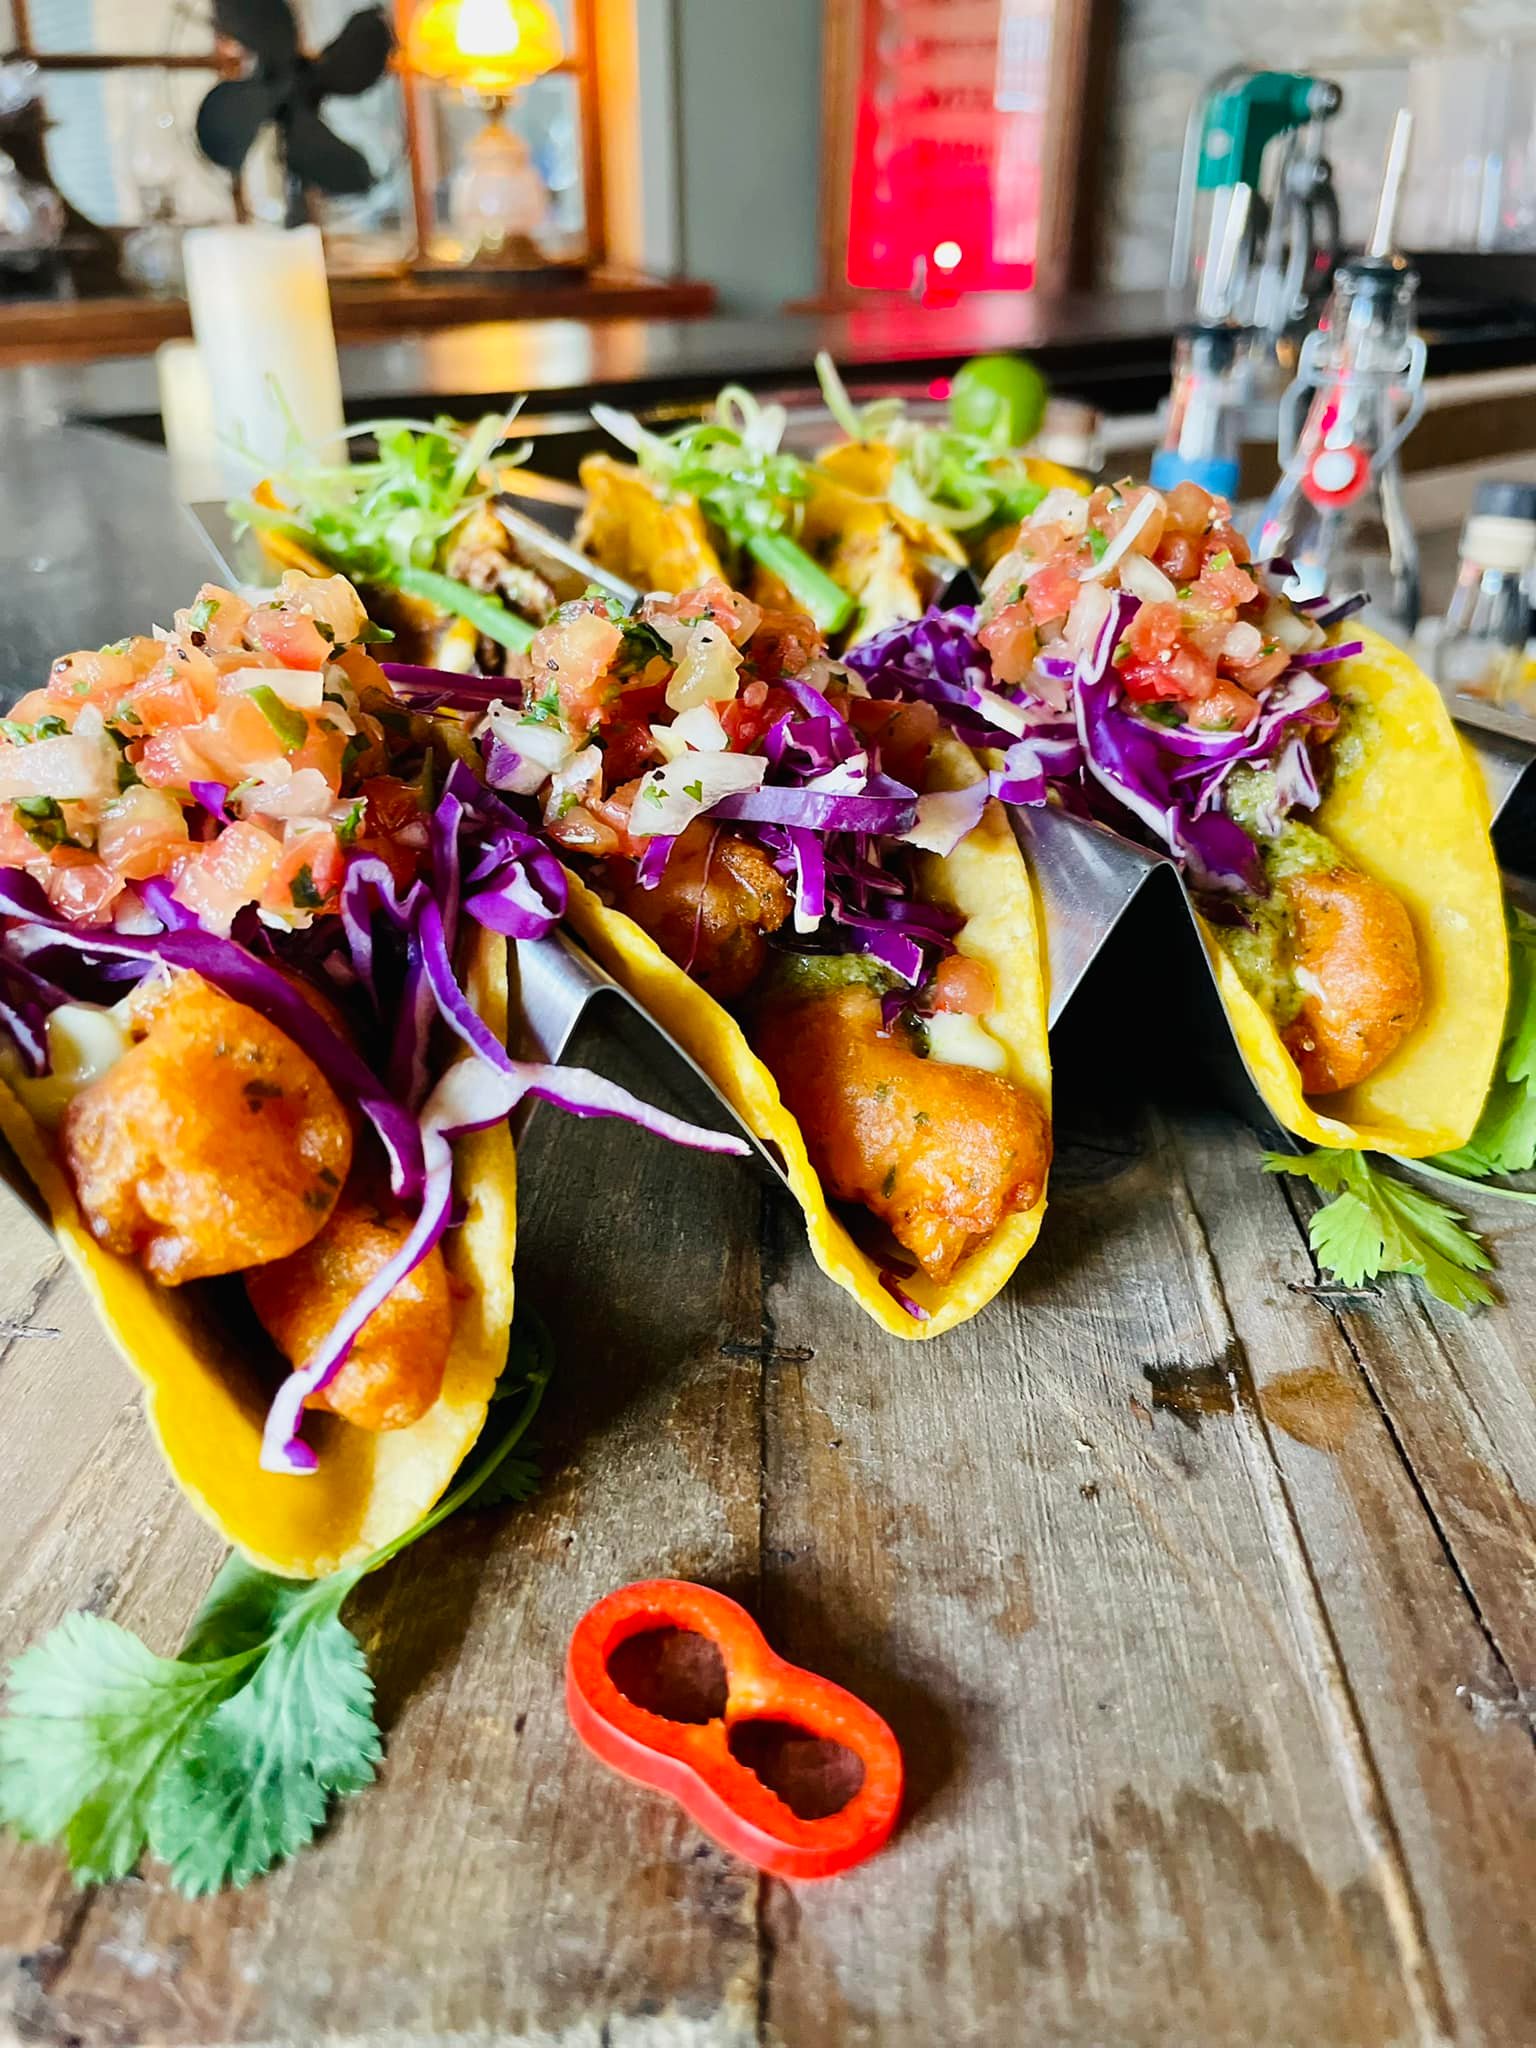 Fish tacos from Thornton Distilling Co.